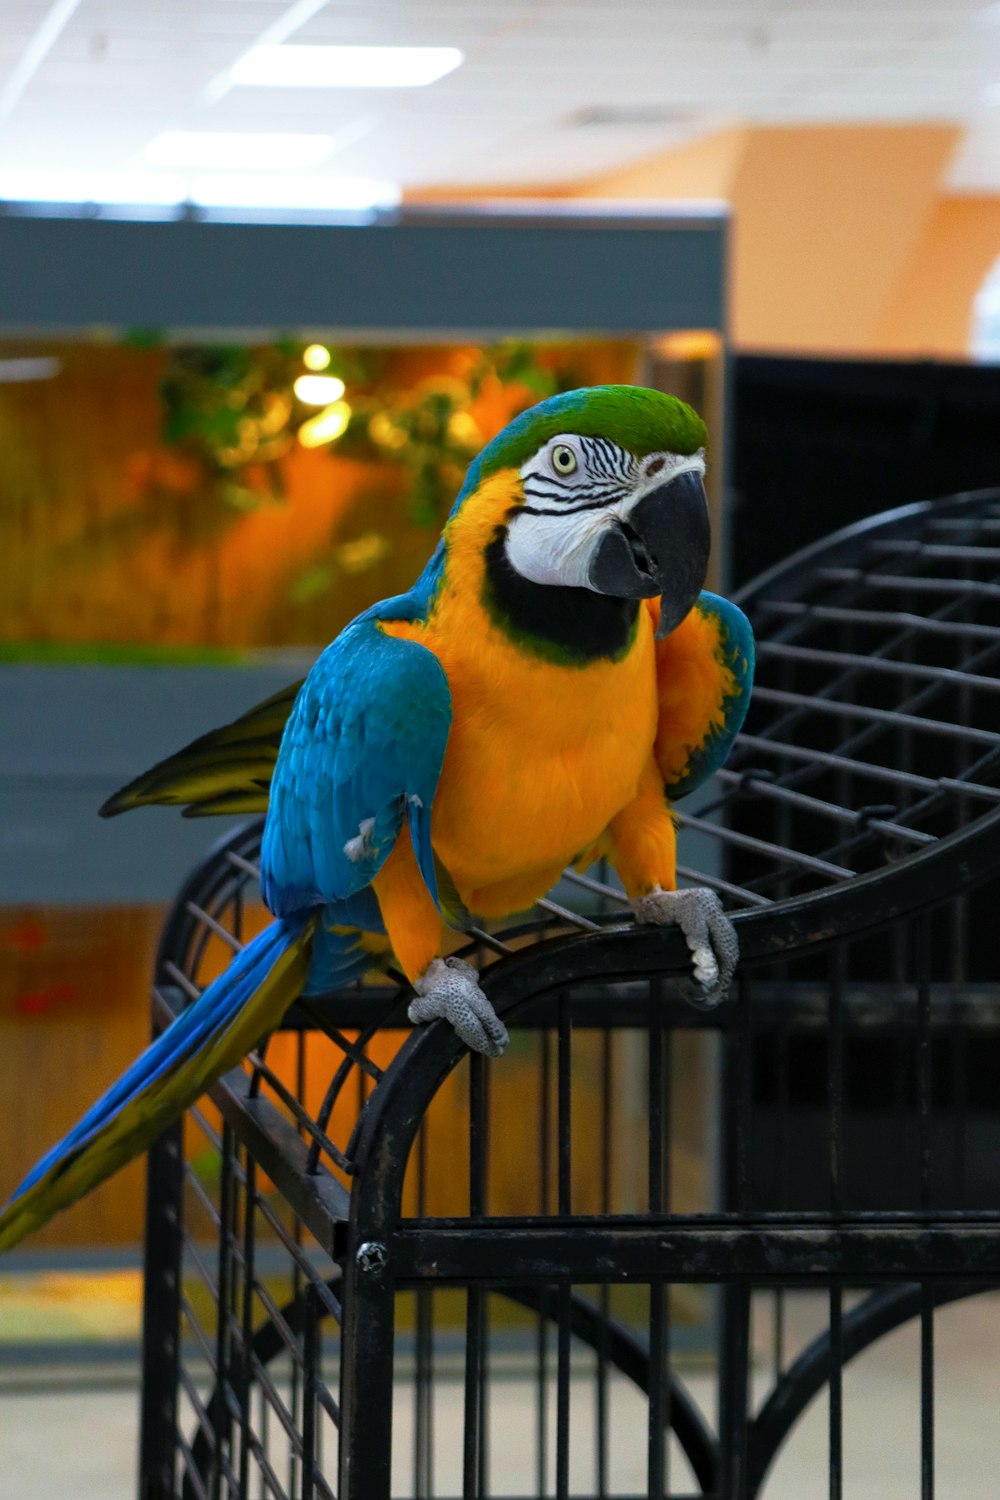 a blue and yellow parrot sitting on top of a cage